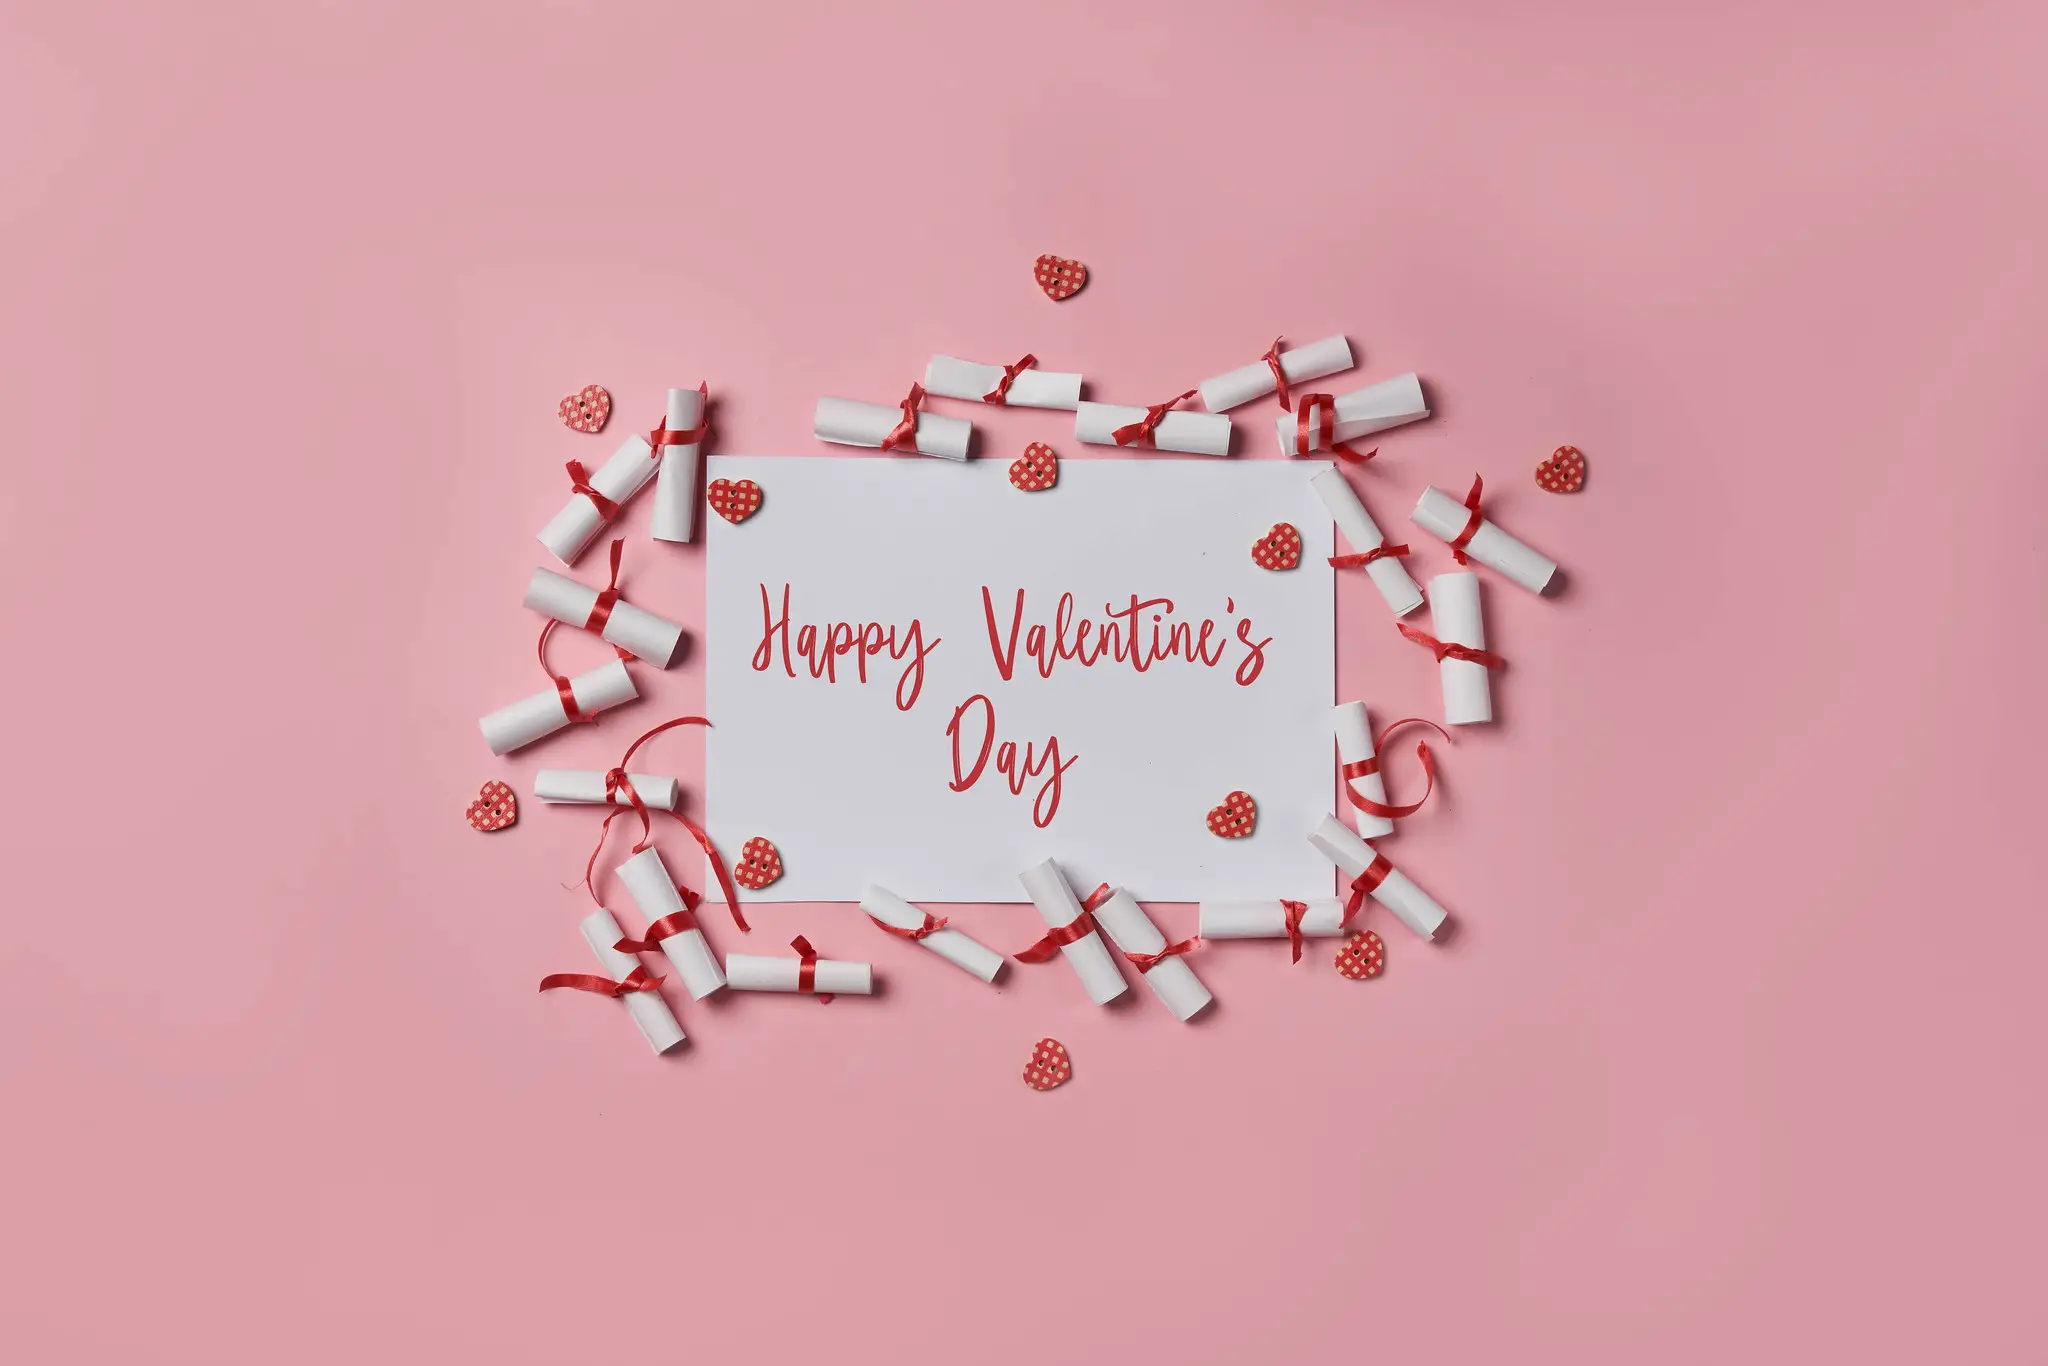 Happy Valentines Day Quotes For Family, Friends & More